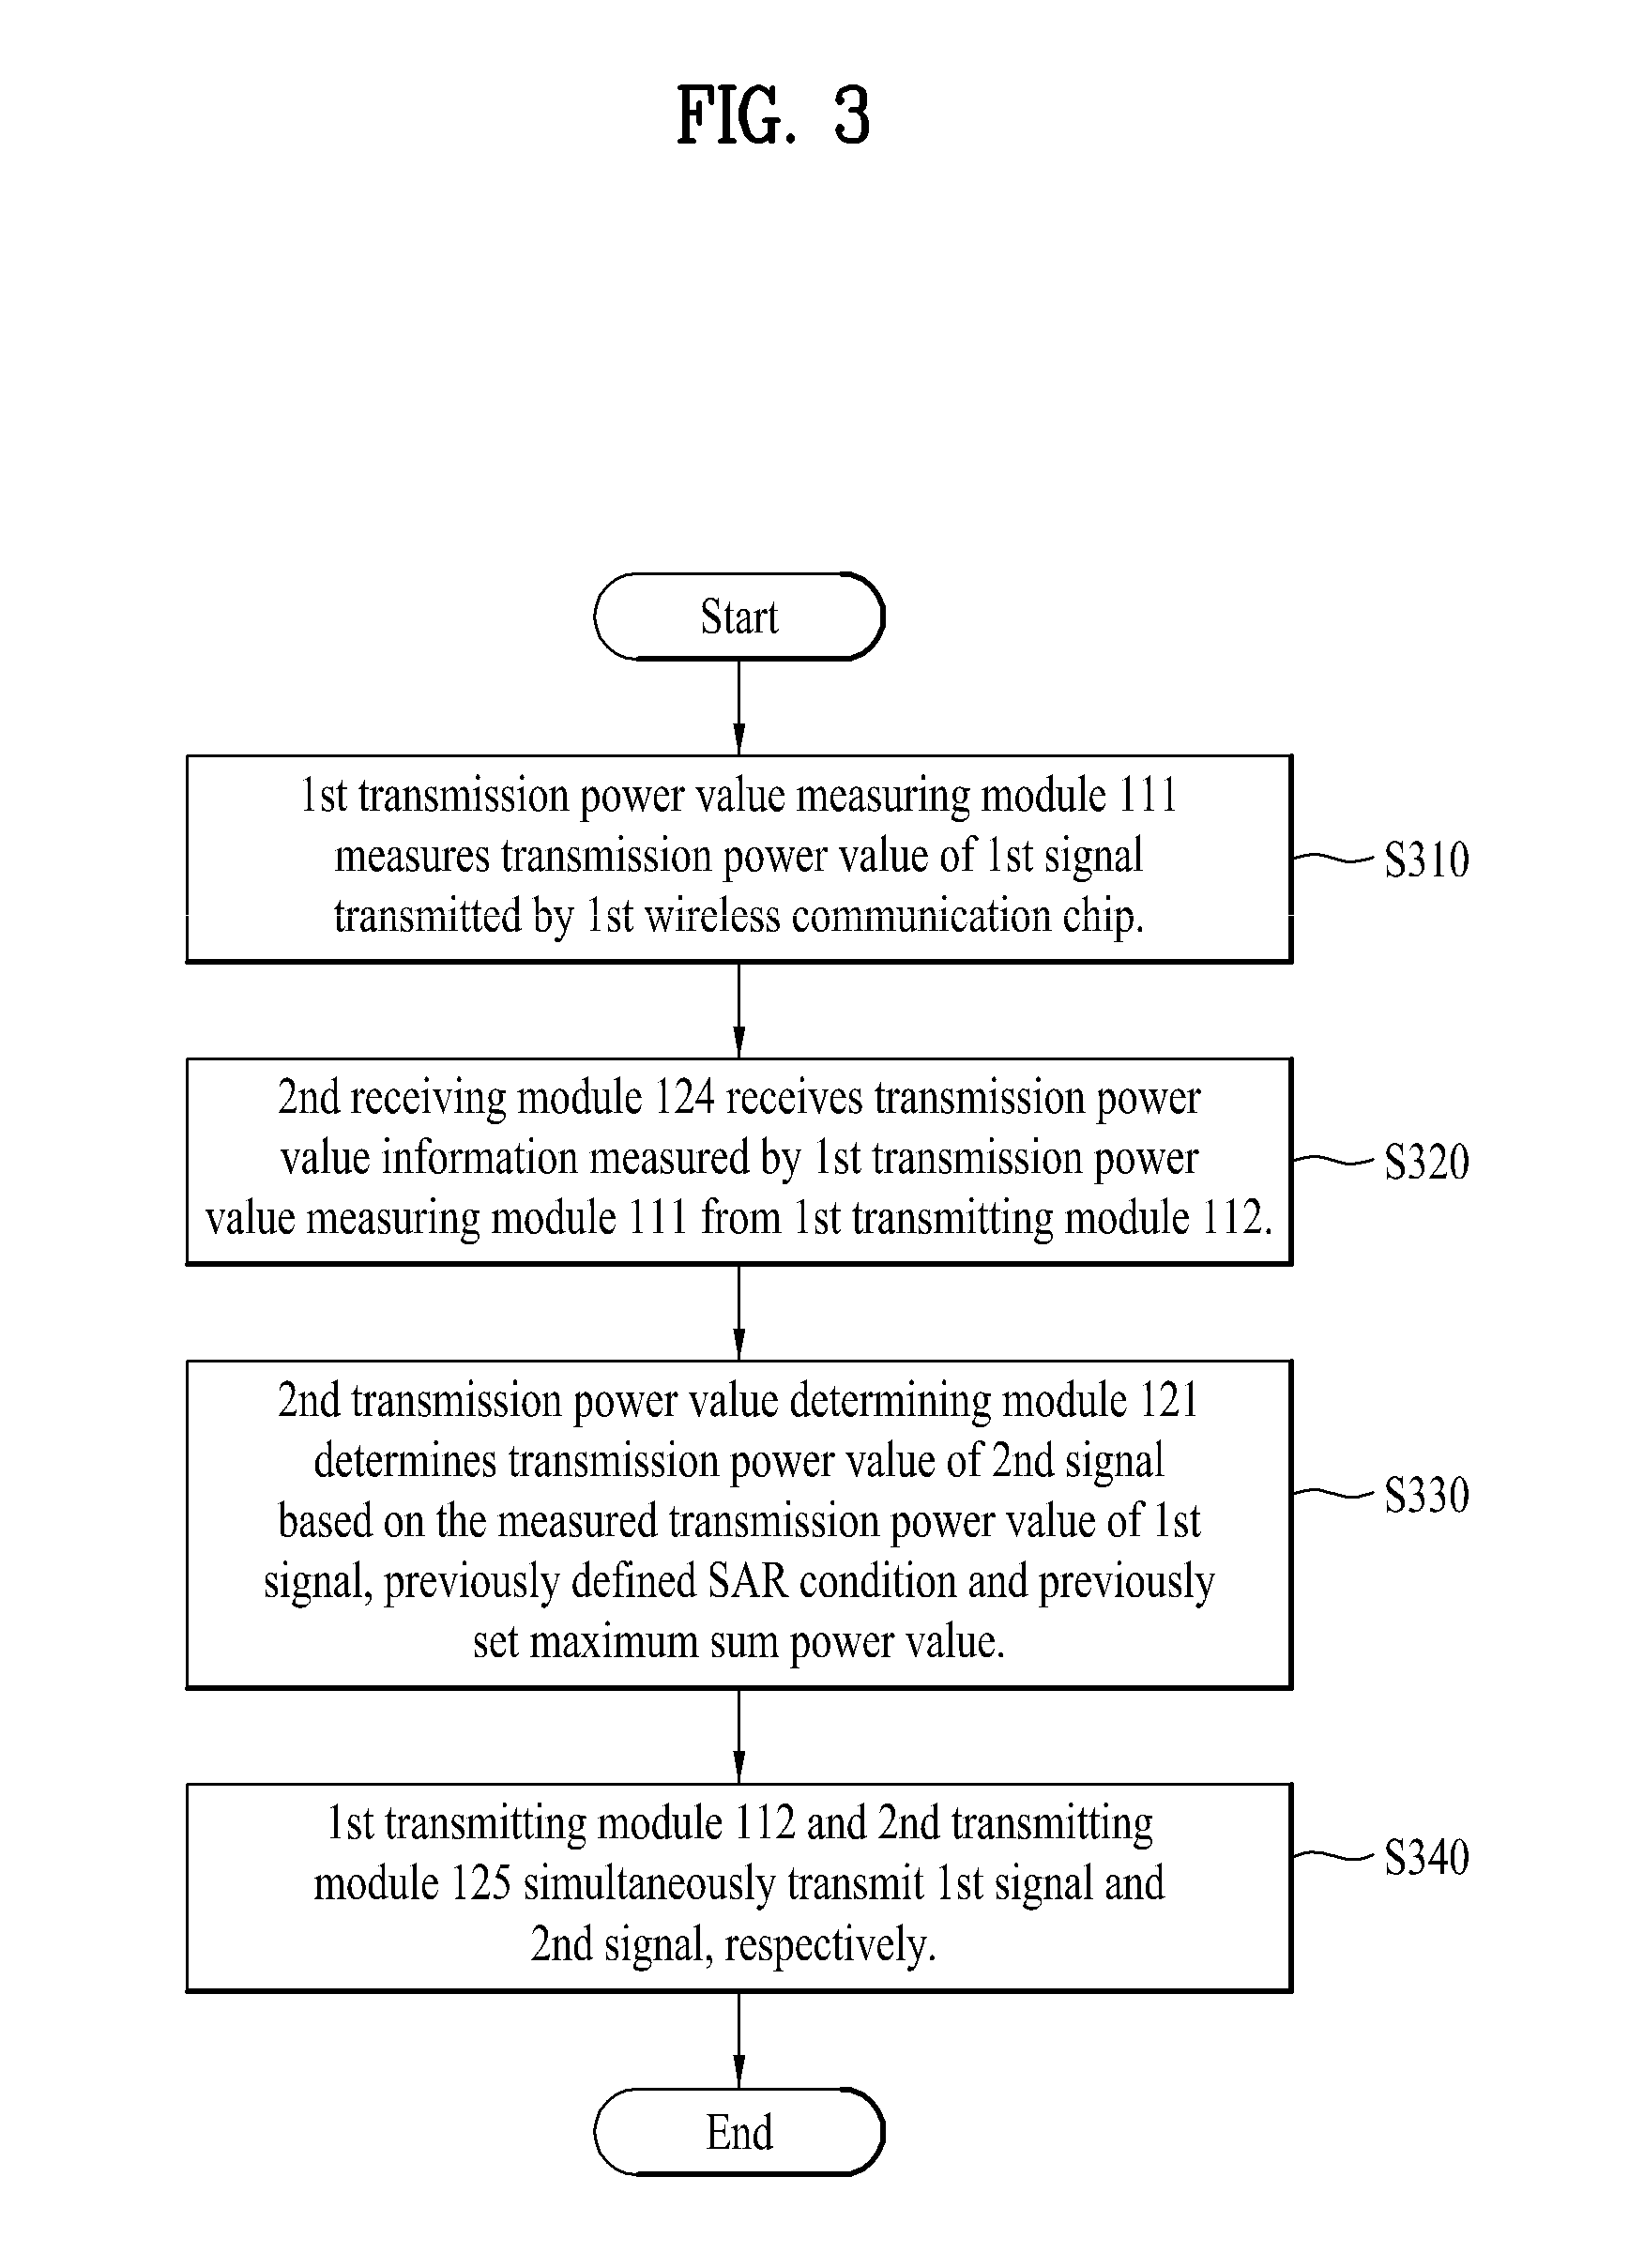 User equipment apparatus for transmitting a plurality of signals simultaneously using at least two wireless communication schemes and method thereof